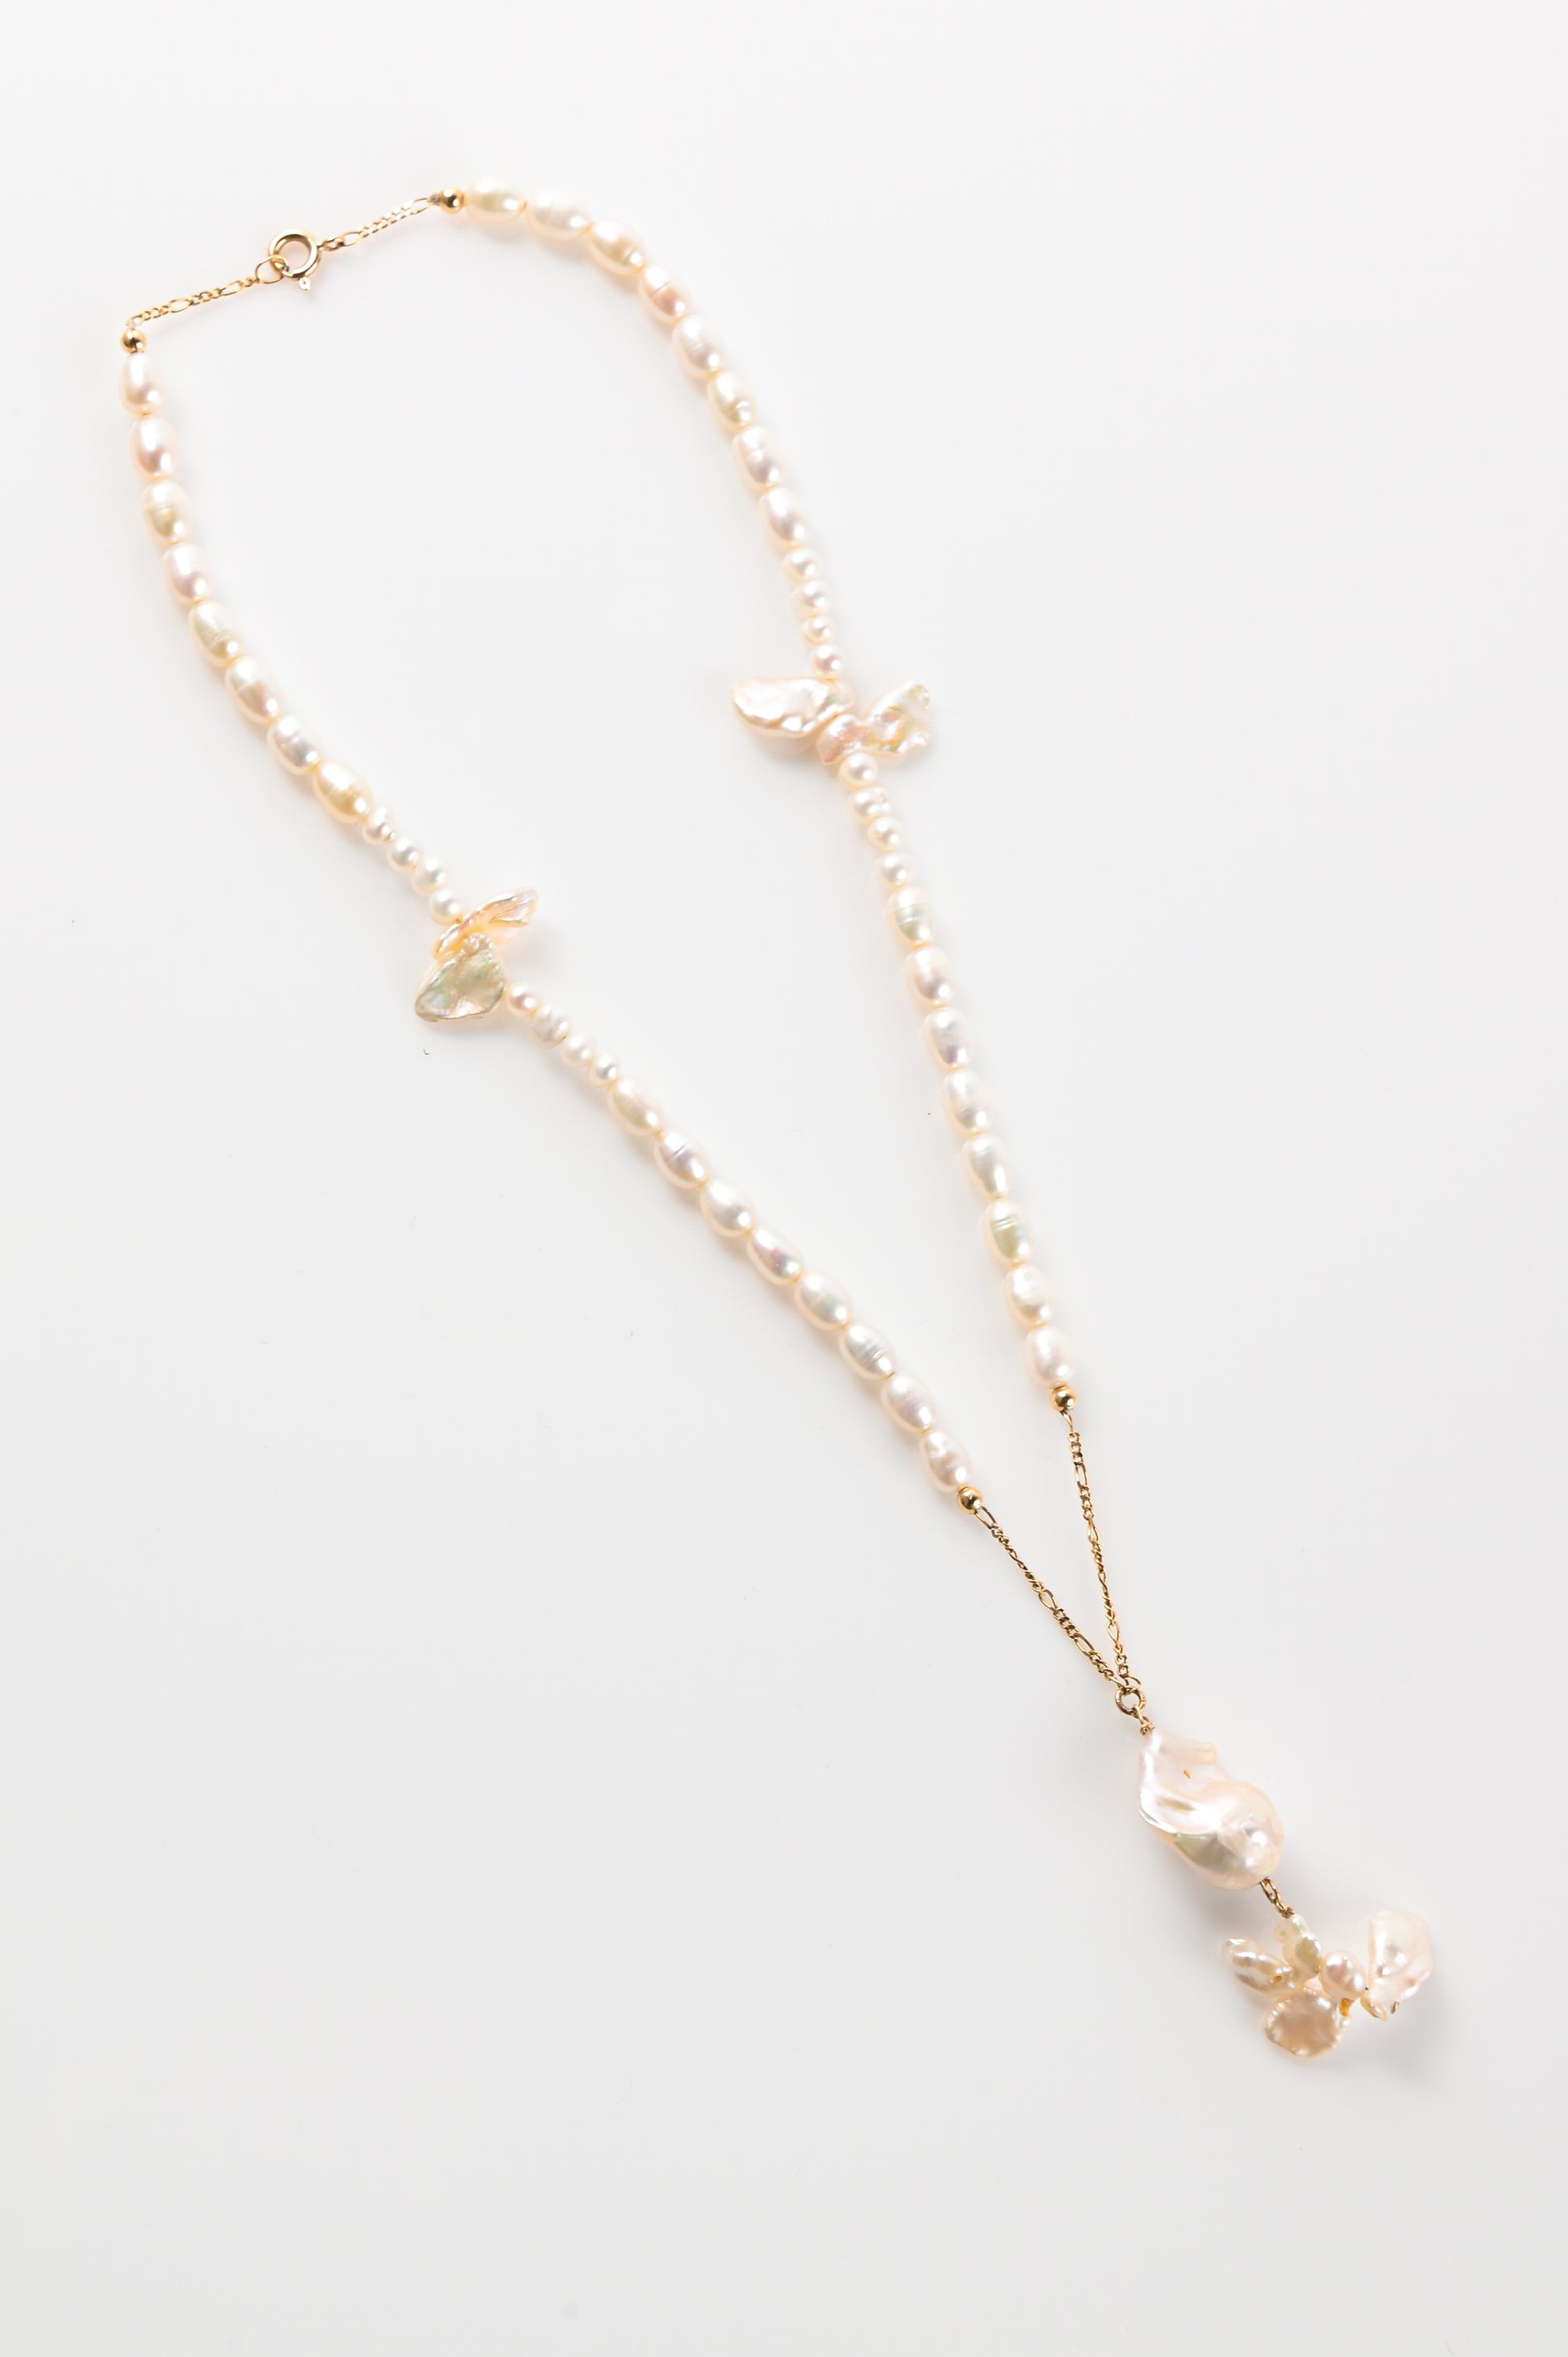 Soft Modality 'Nuture' Necklace In 9ct Gold